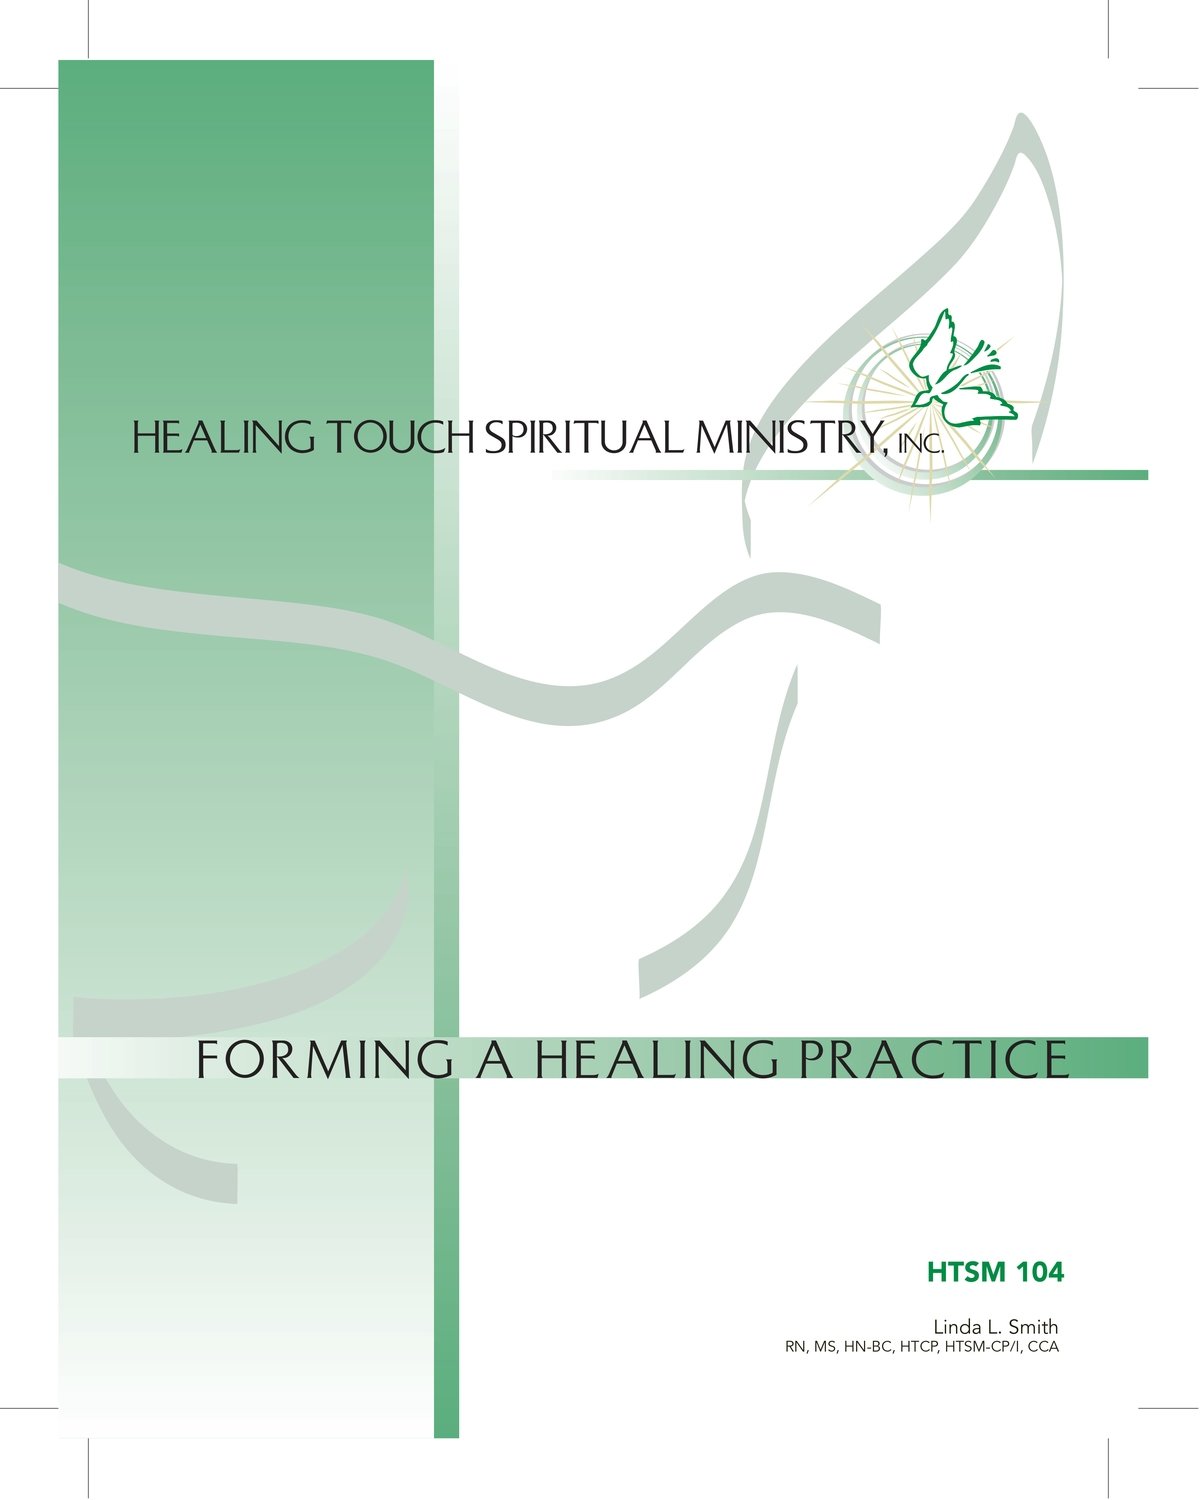 HTSM 104: Forming A Healing Practice - North Andover, MA - January 14-16, 2022